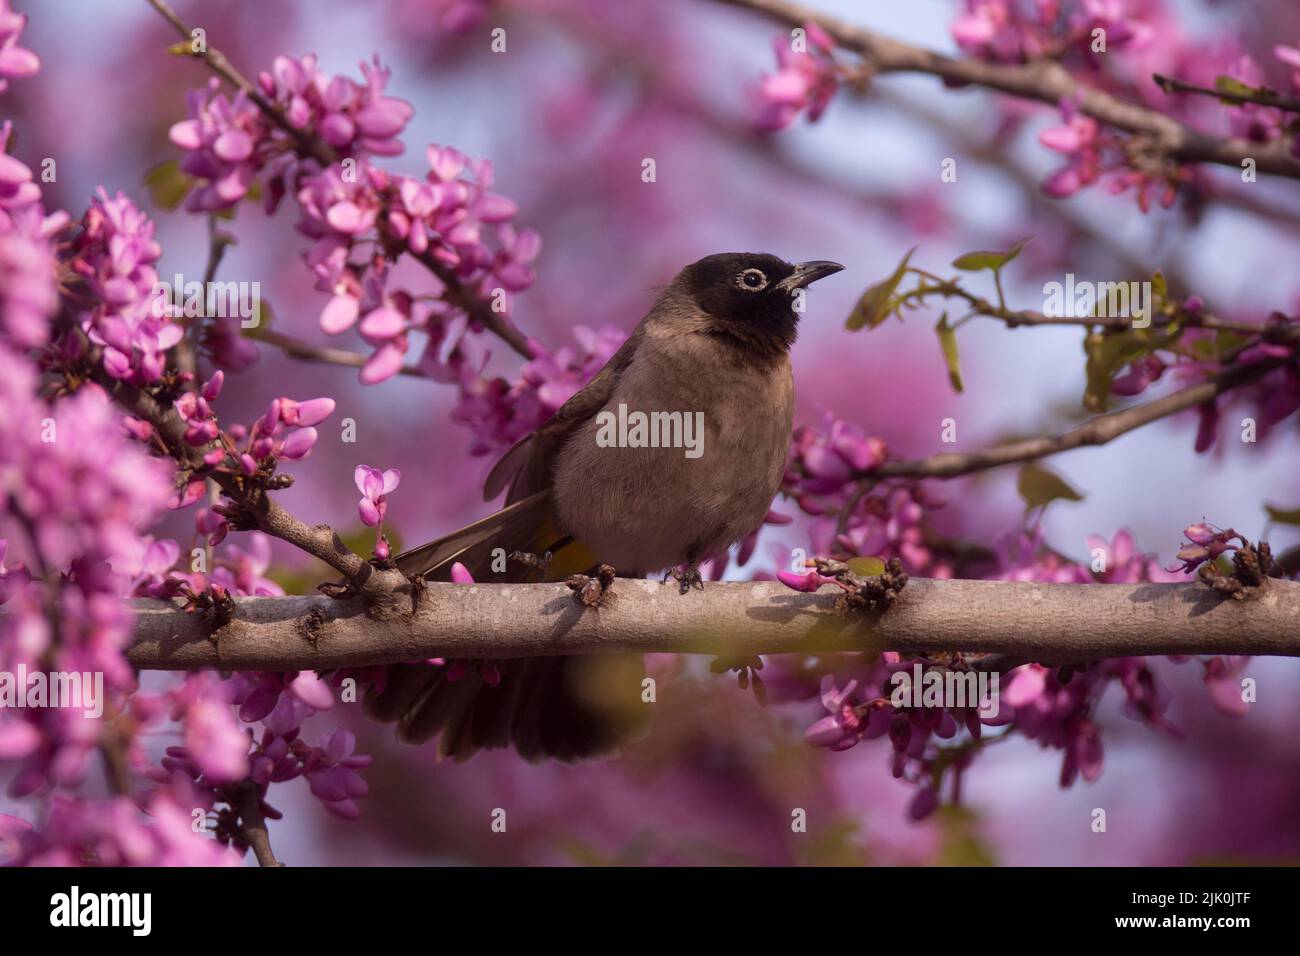 Yellow-vented Bulbul (Pycnonotus xanthopygos) on a Judas tree with mauve blossoms as a background Photographed in Israel in April Stock Photo